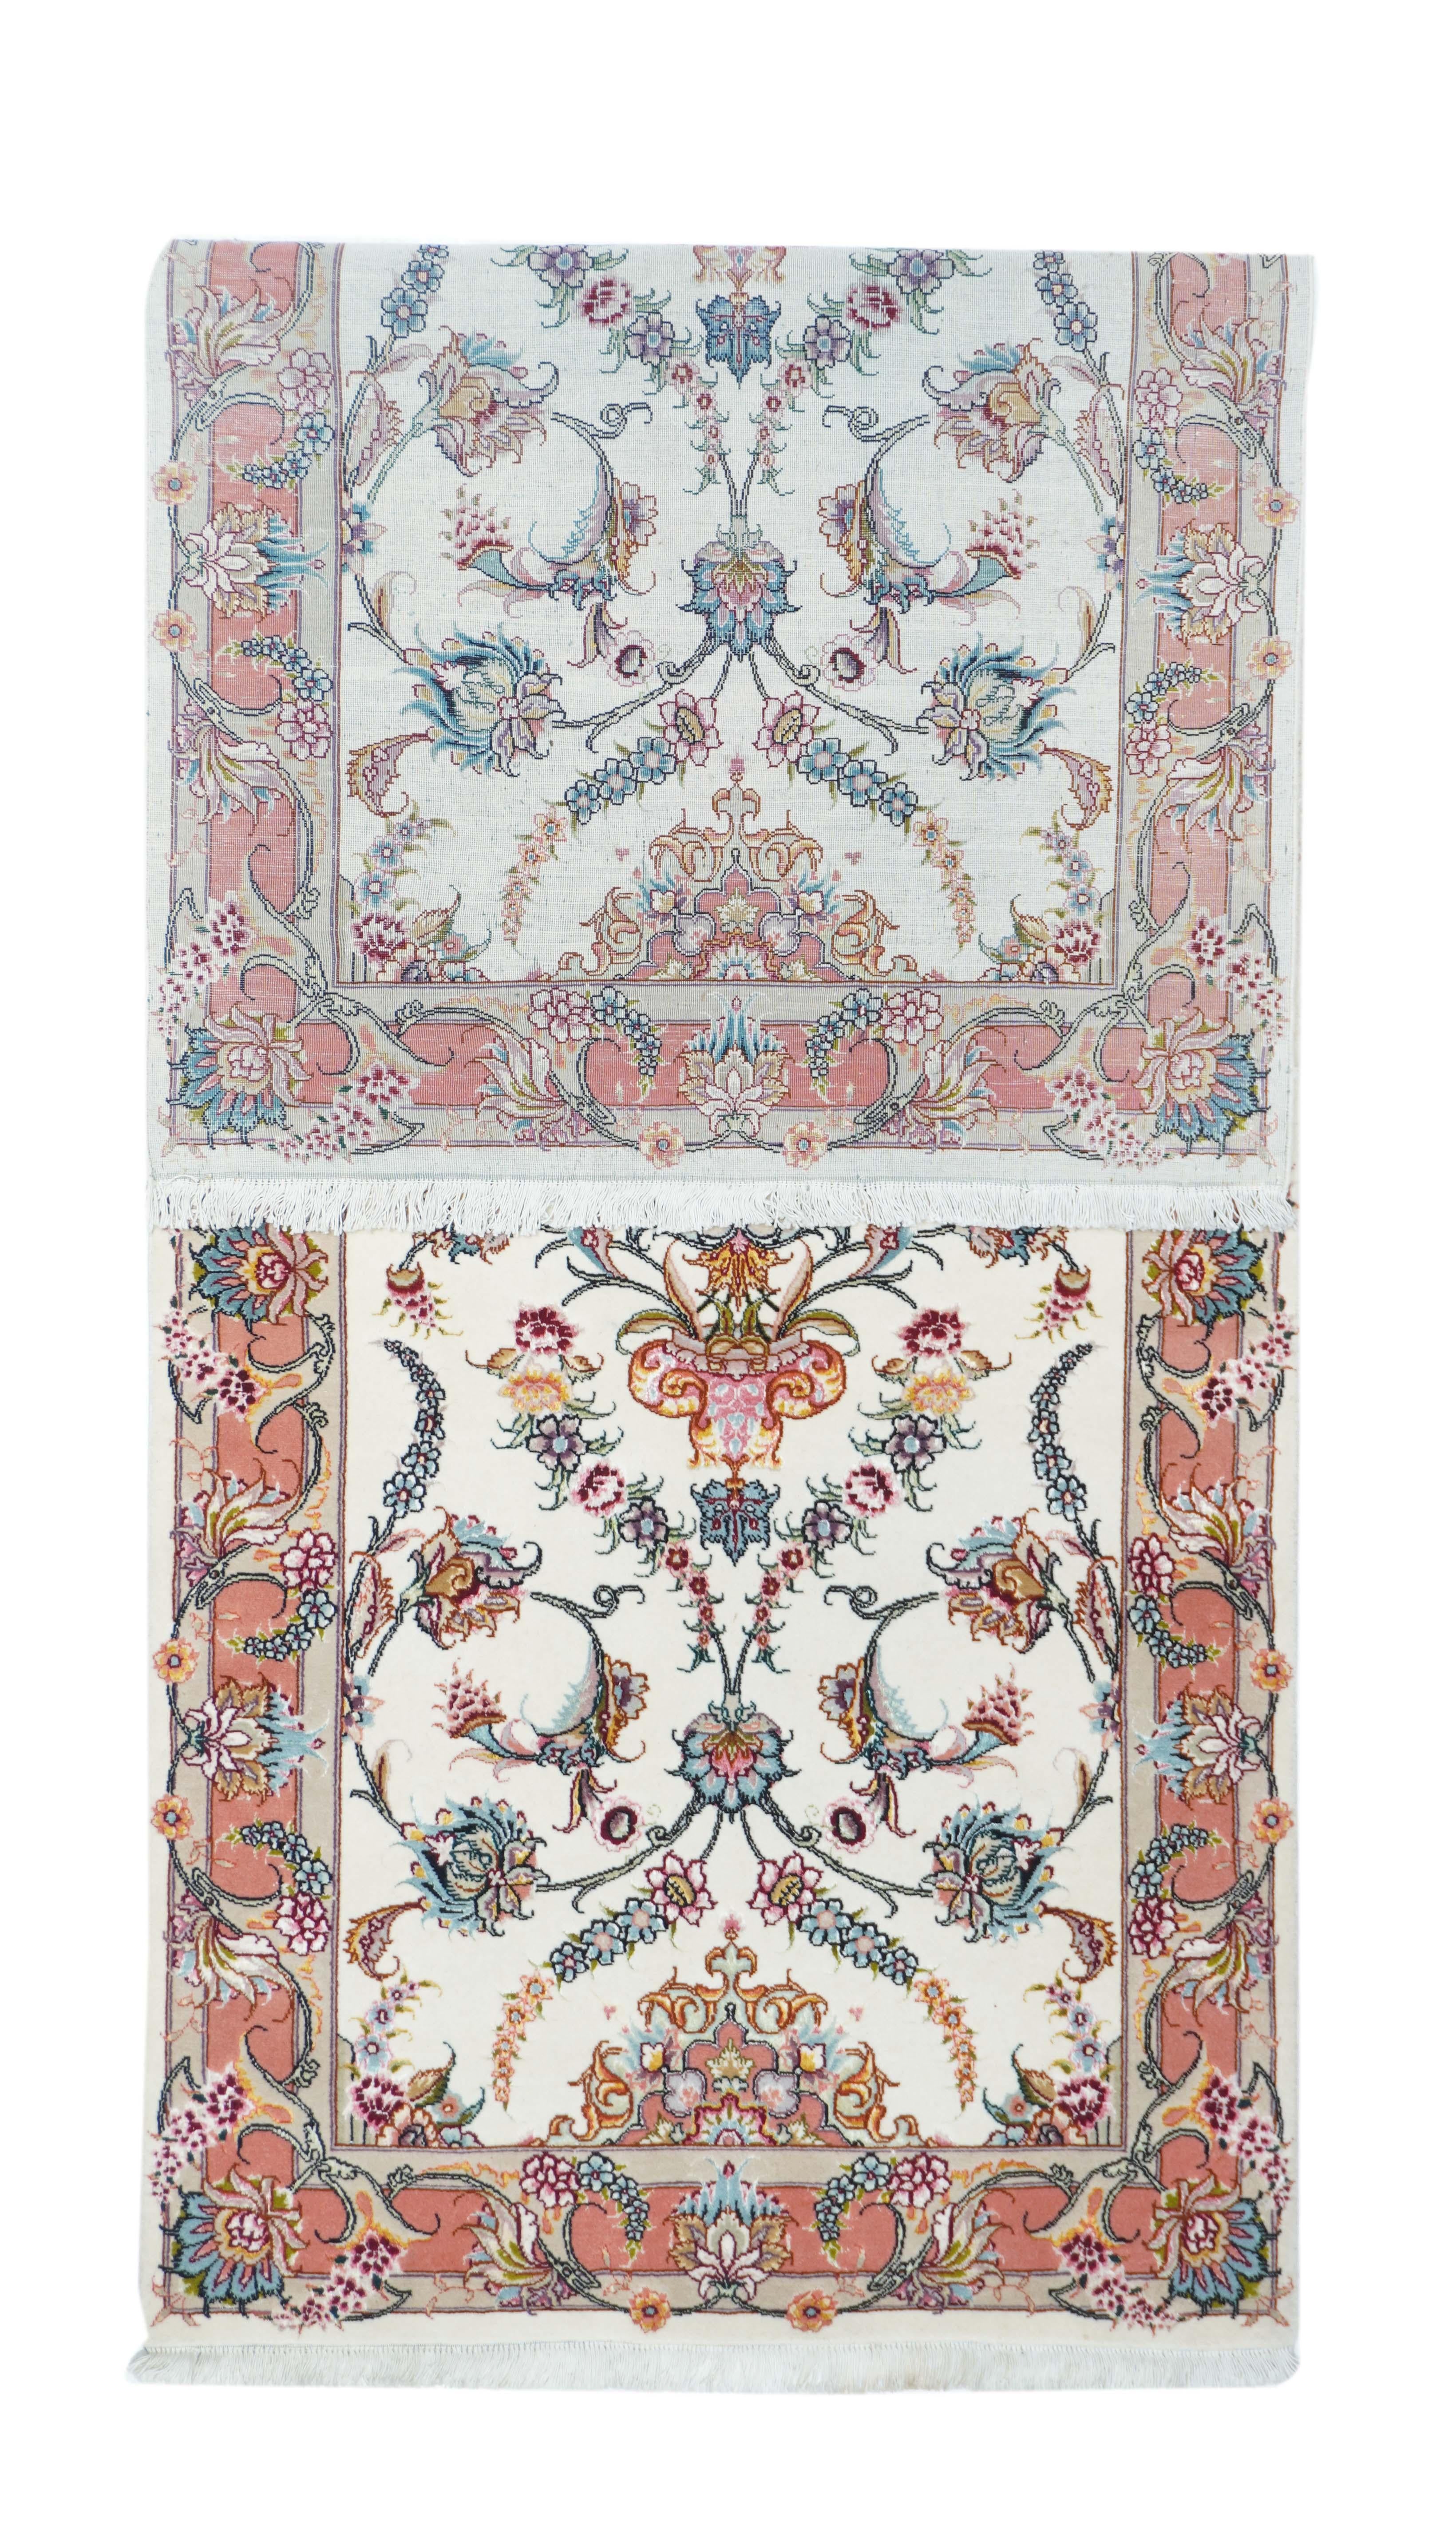 Vintage Tabriz rug 2'9'' x 7'8''. The wool pile is accented in silk. The off white field shows a small octilobe medallion organizing racemes, palmettes, coiling vinery and openwork palmettes. Beige broken border with racemes and palmettes. Cotton